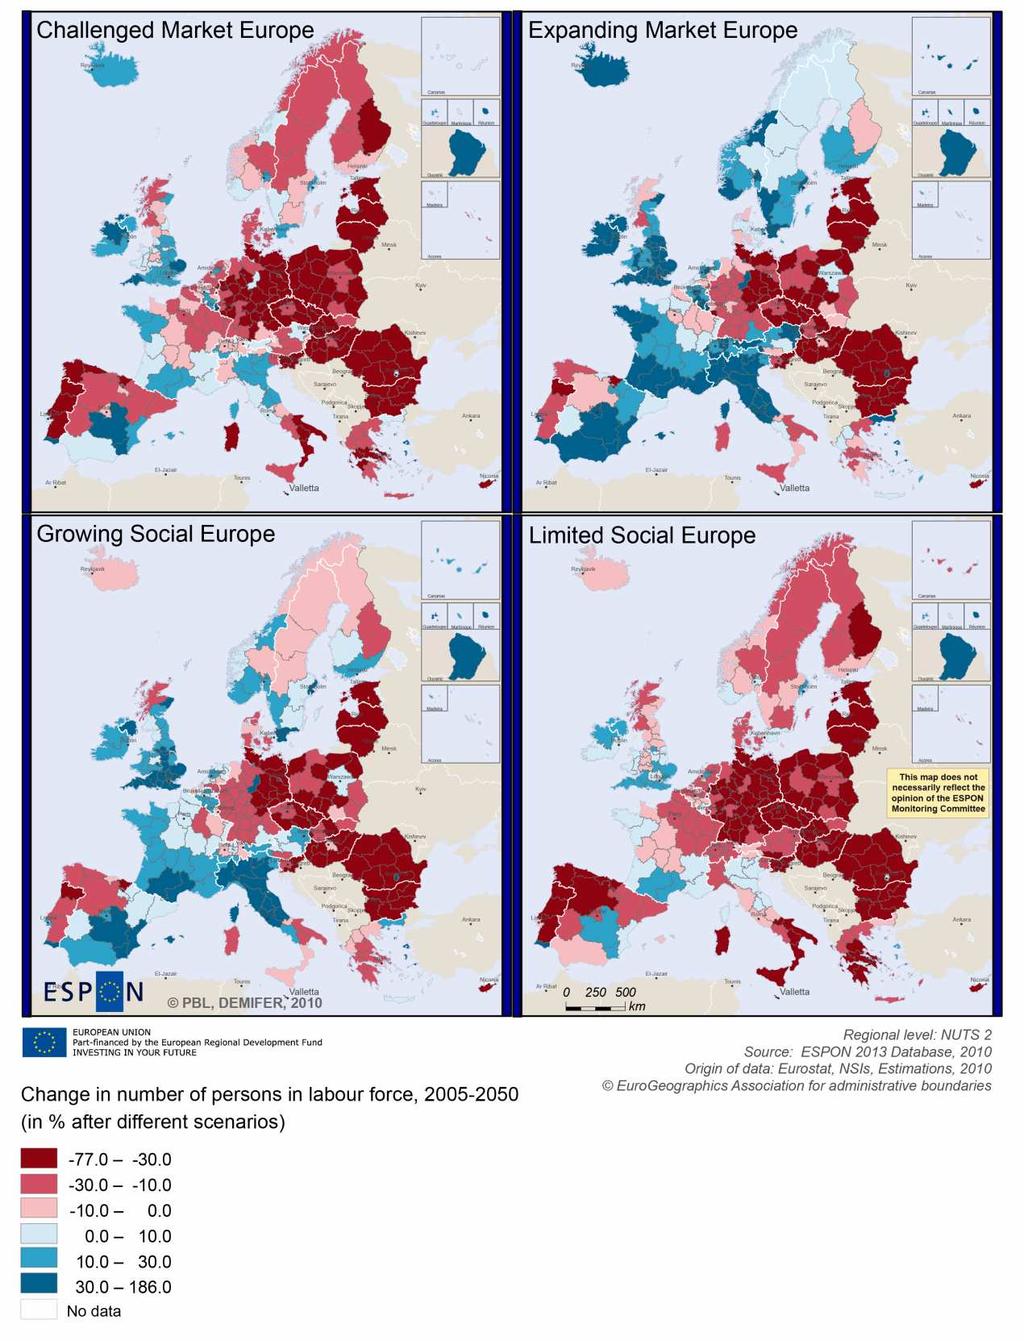 MAP 3 Change in Labour Force 2005-2050 (ESPON